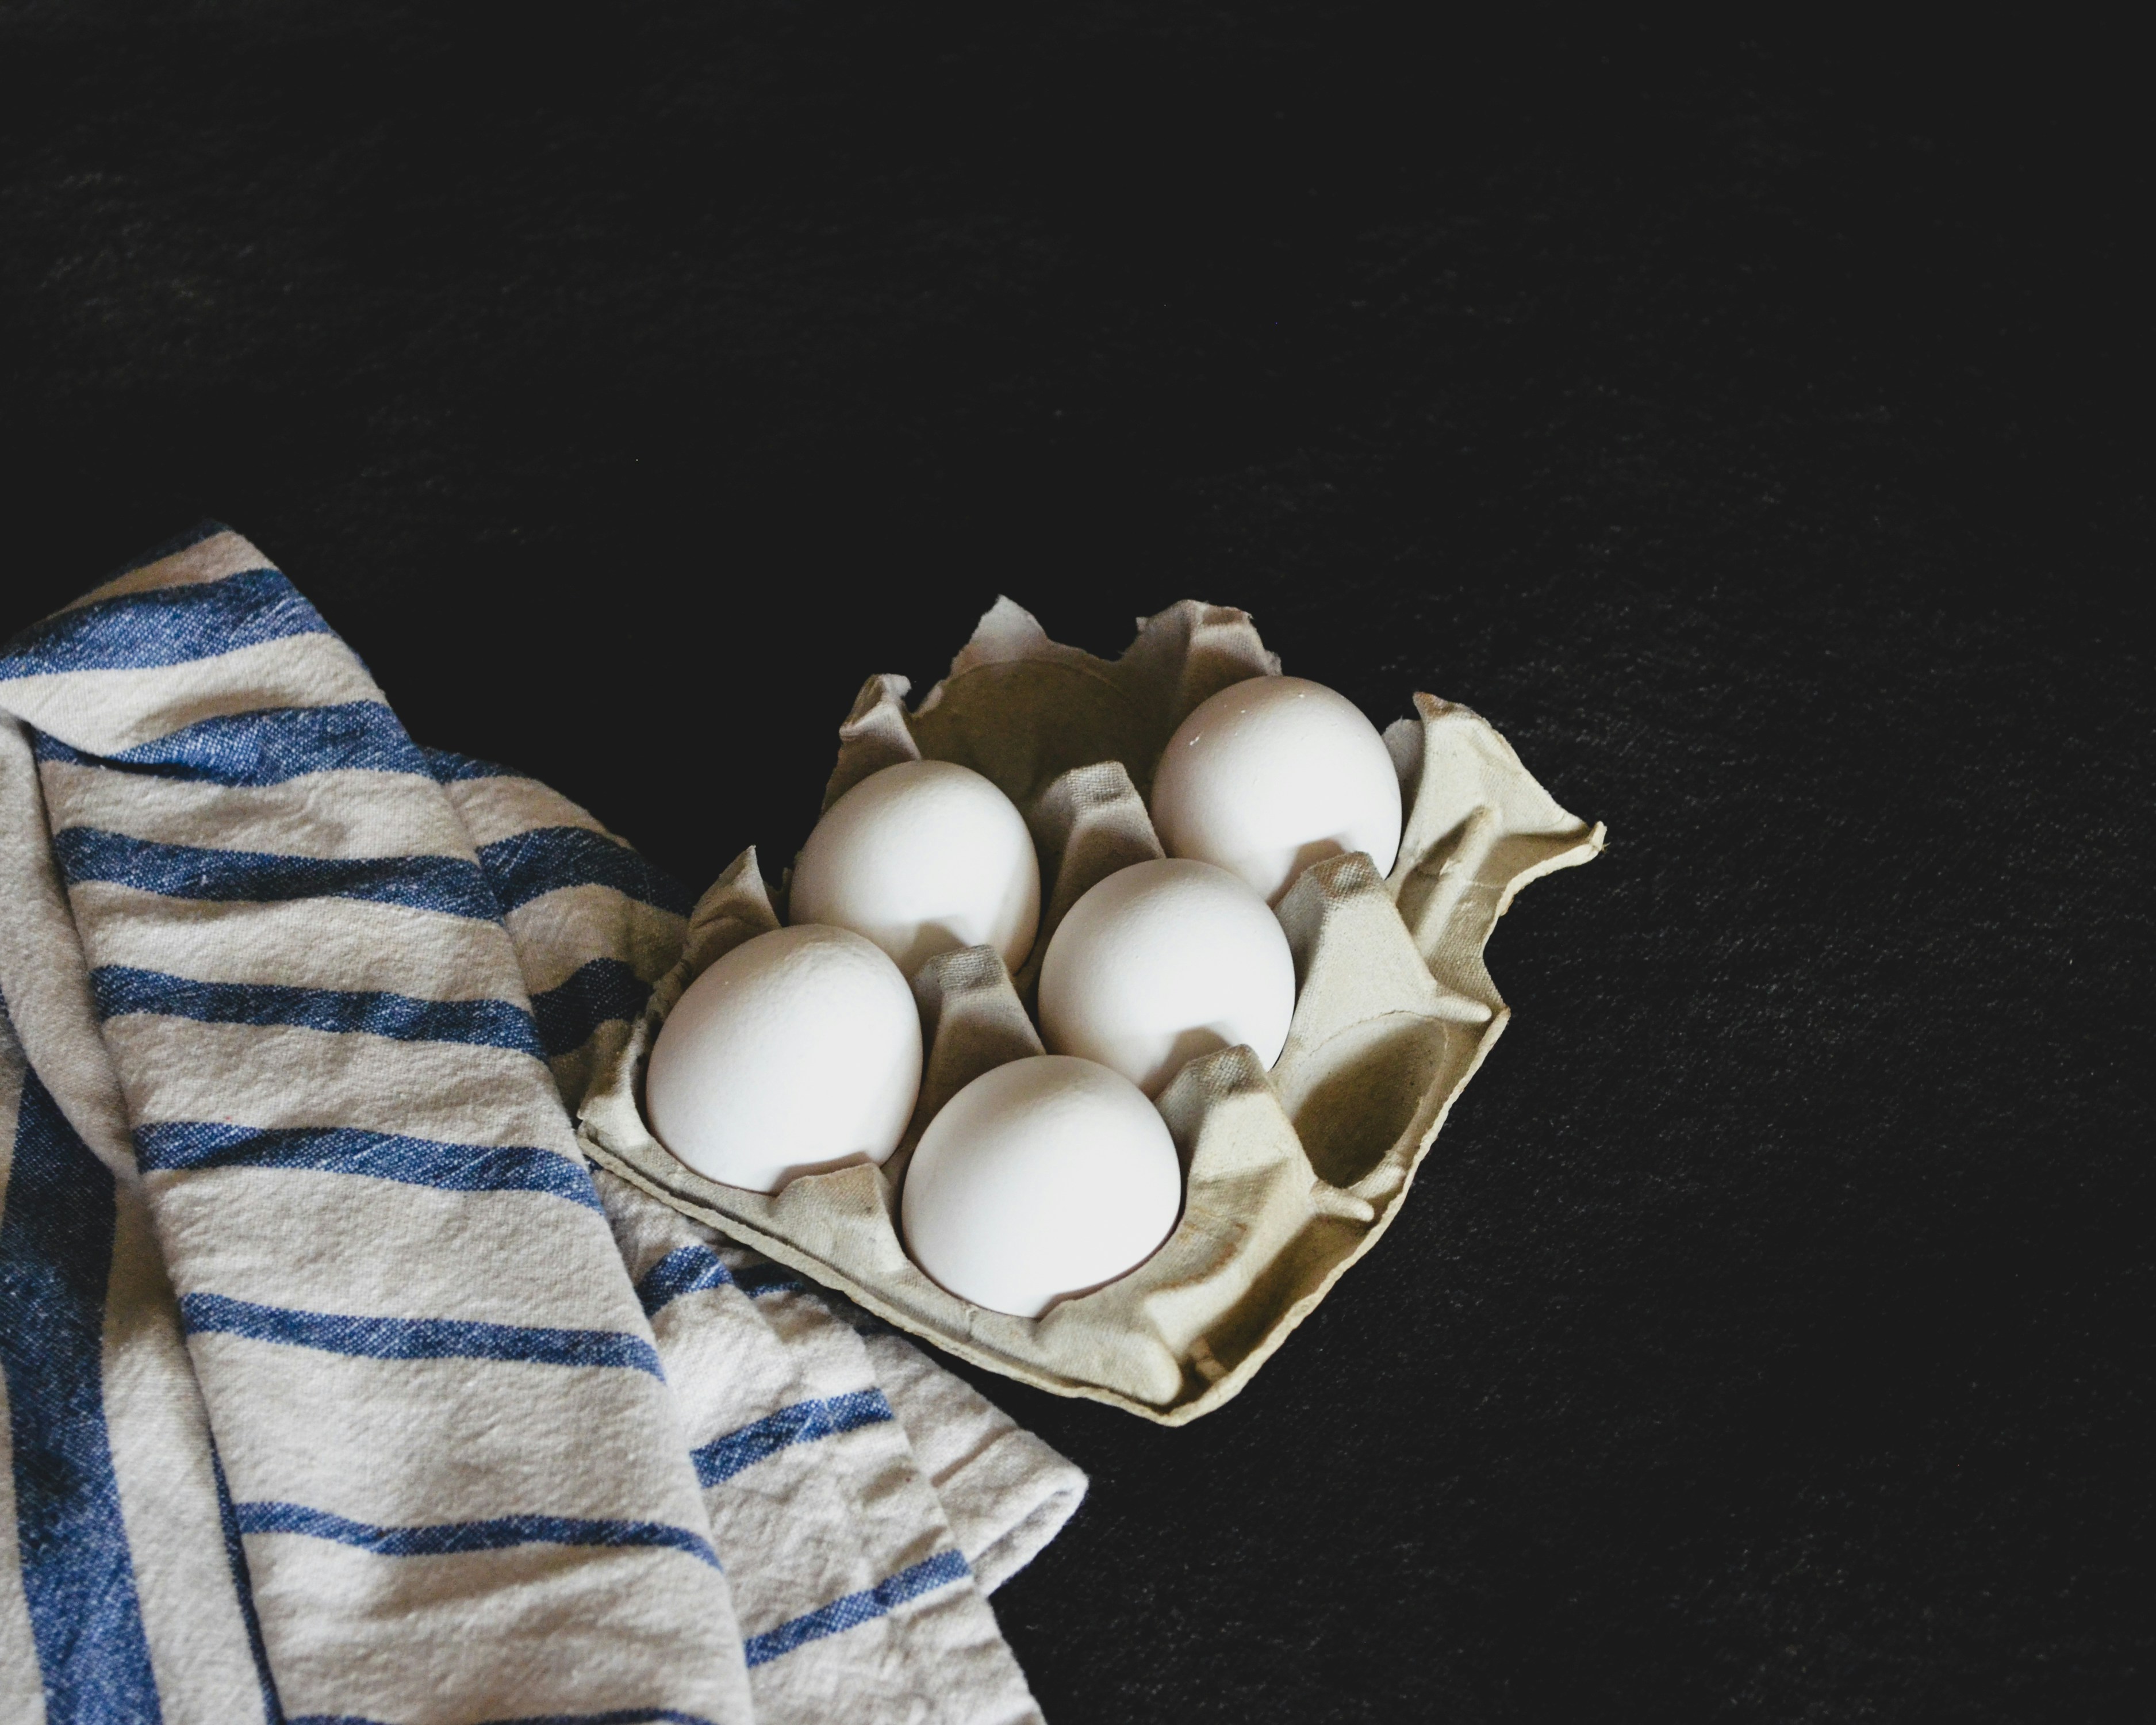 Egg whites help with excess sebum regulation which prevents a dry scalp.